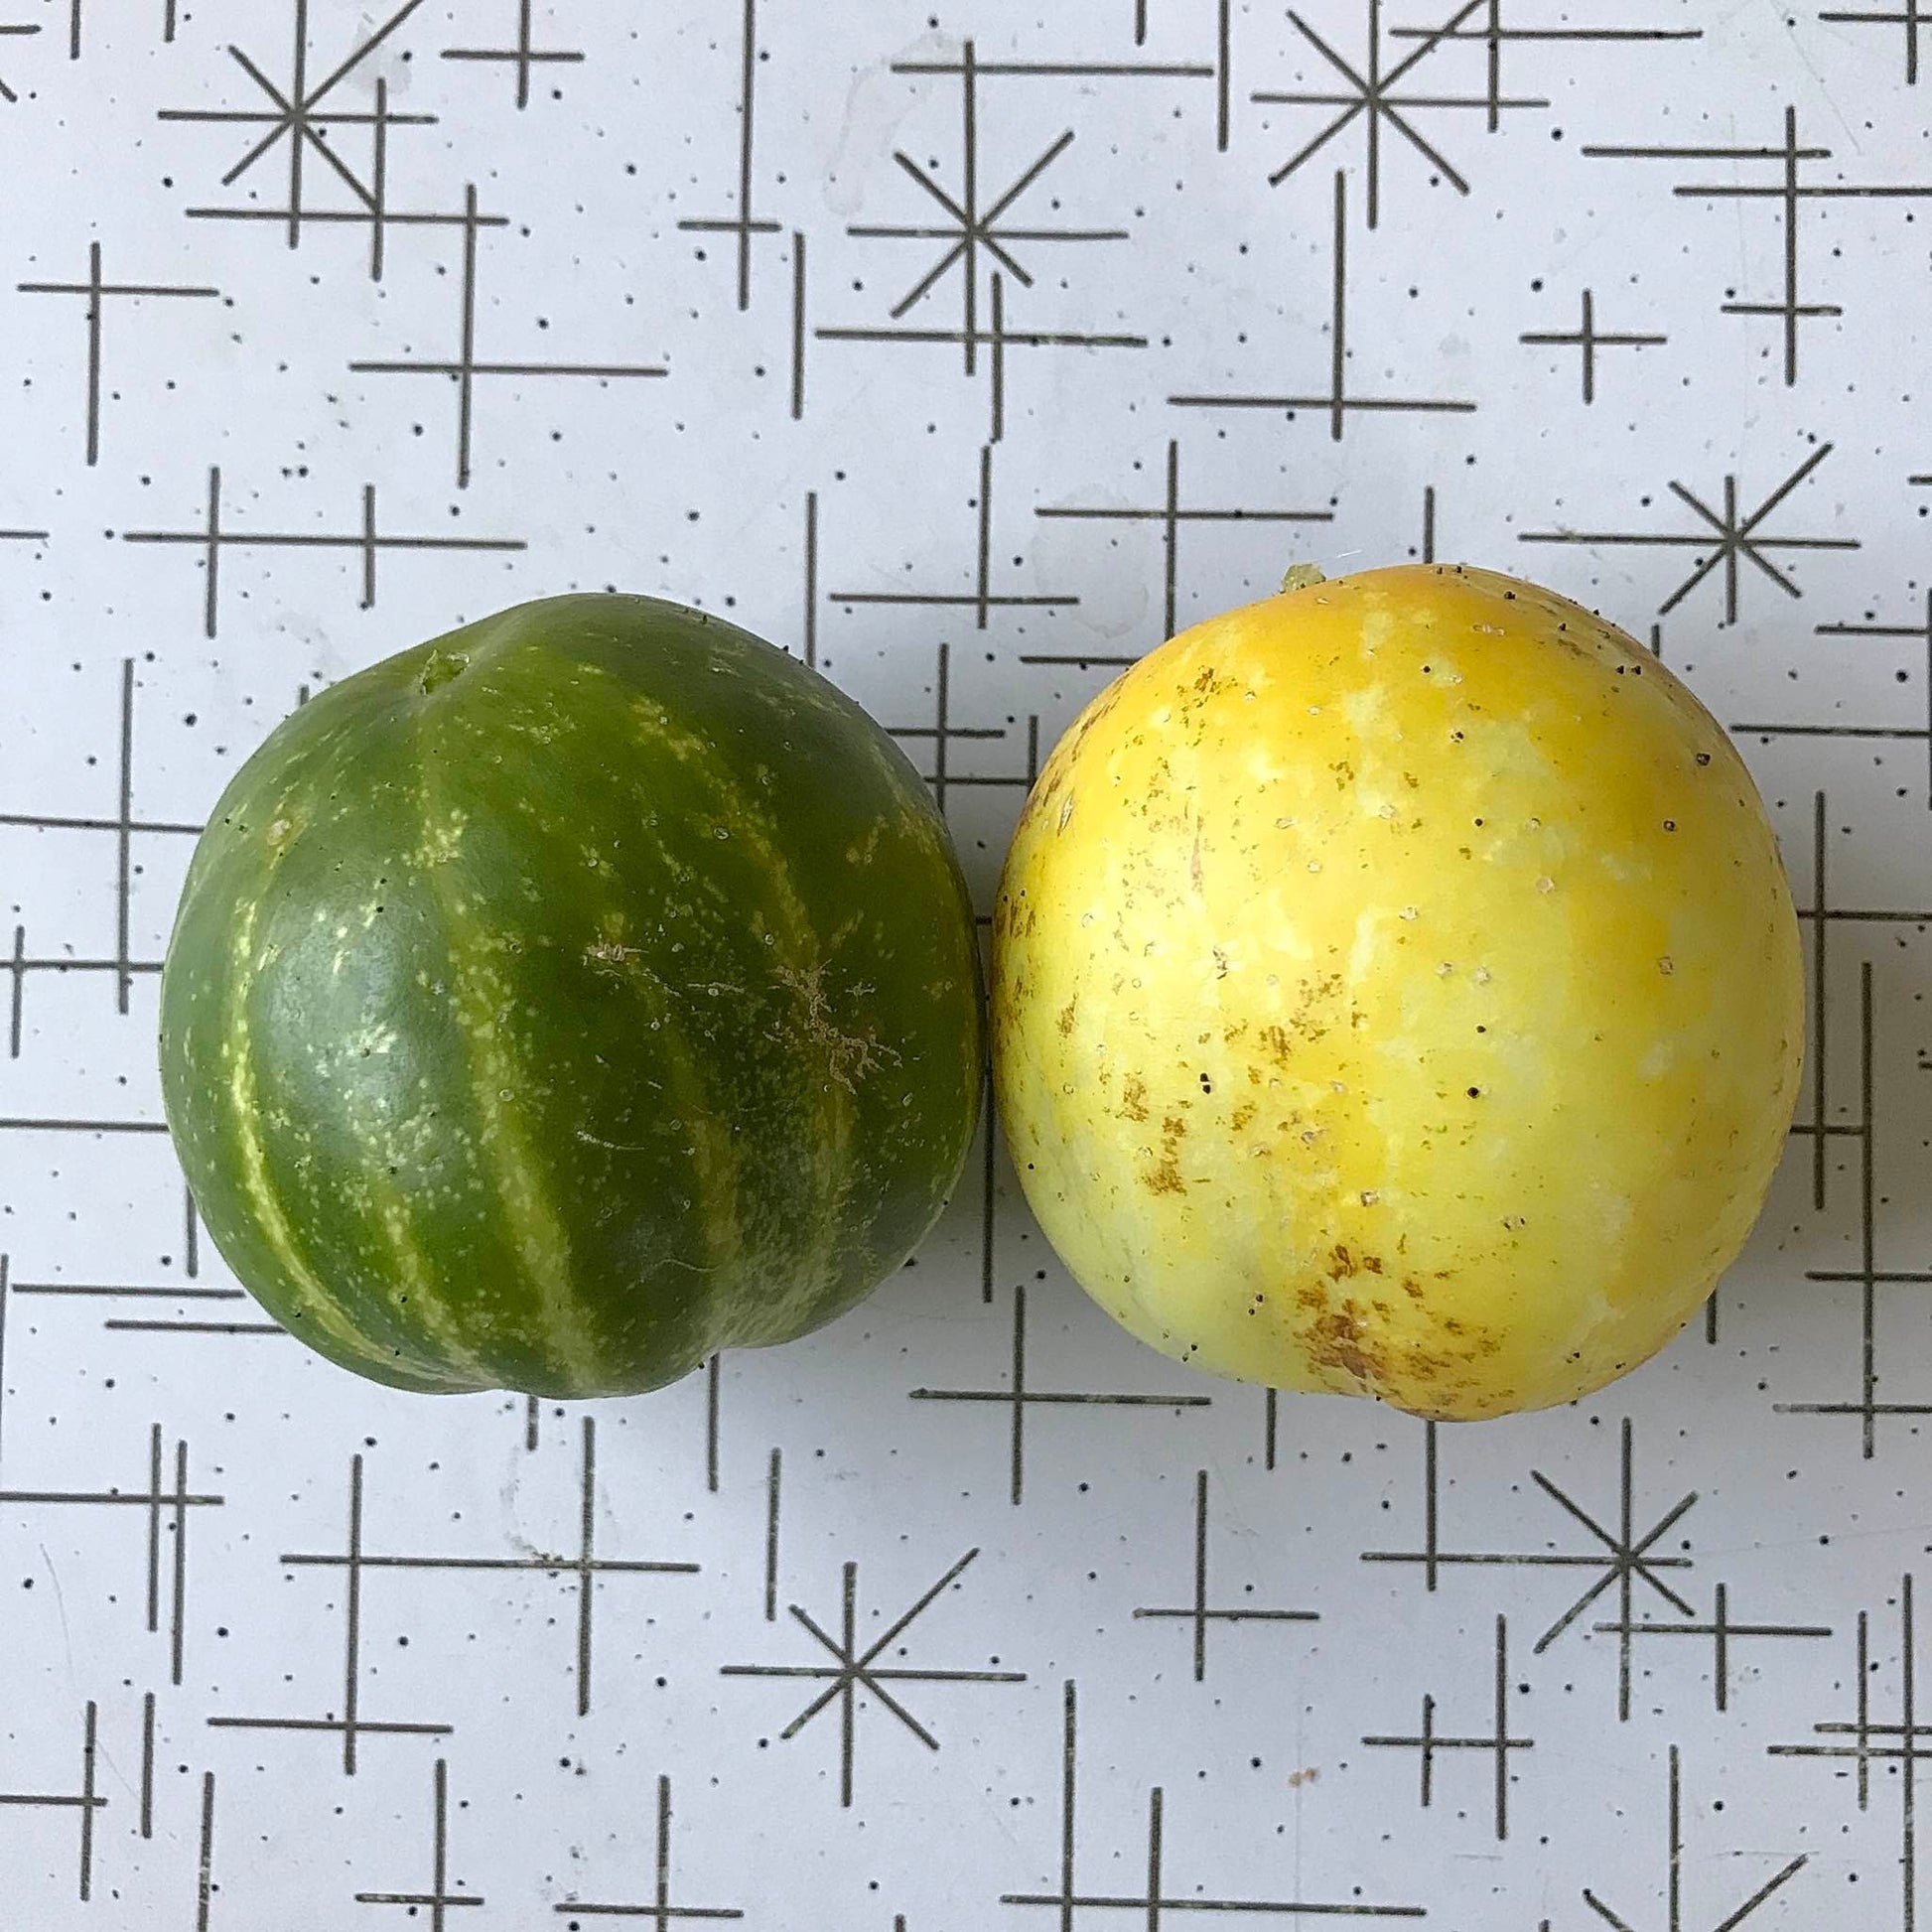 A lemon cucumber and a lime cucumber side by side on a table.